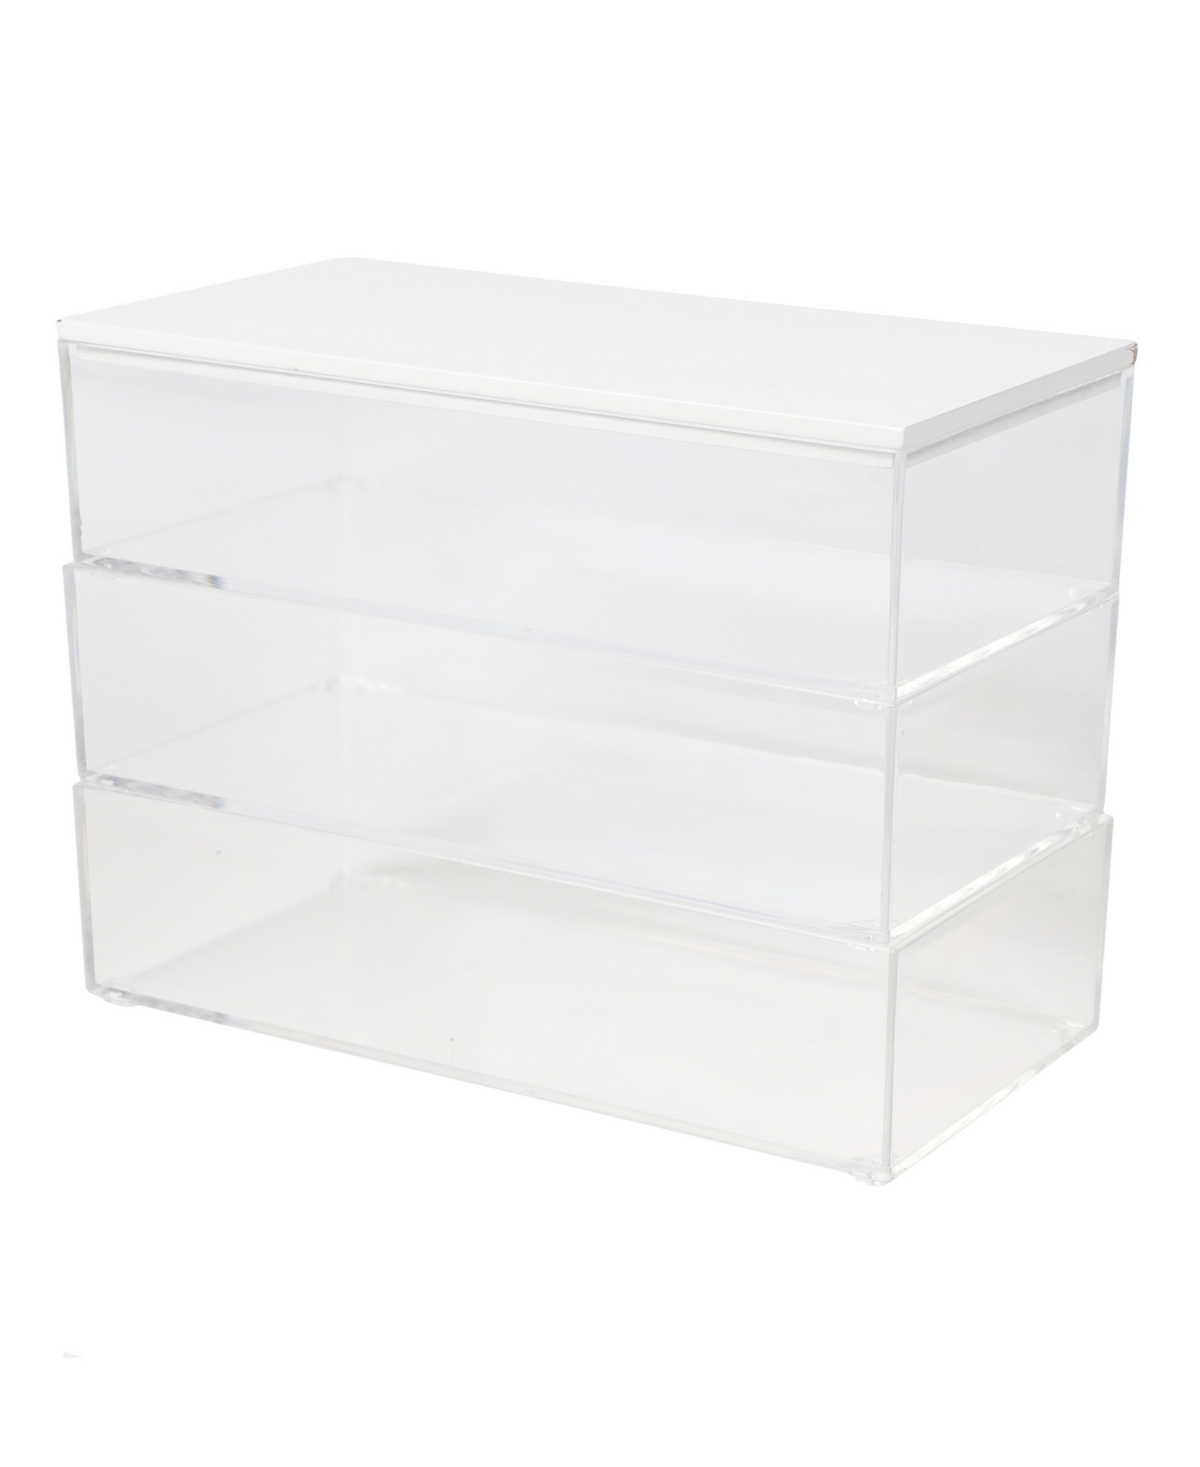 Martha Stewart Brody Plastic Storage Organizer Bins With Engineered Wood Lid For Home Office, Kitchen Or Bathroom, In Clear,white